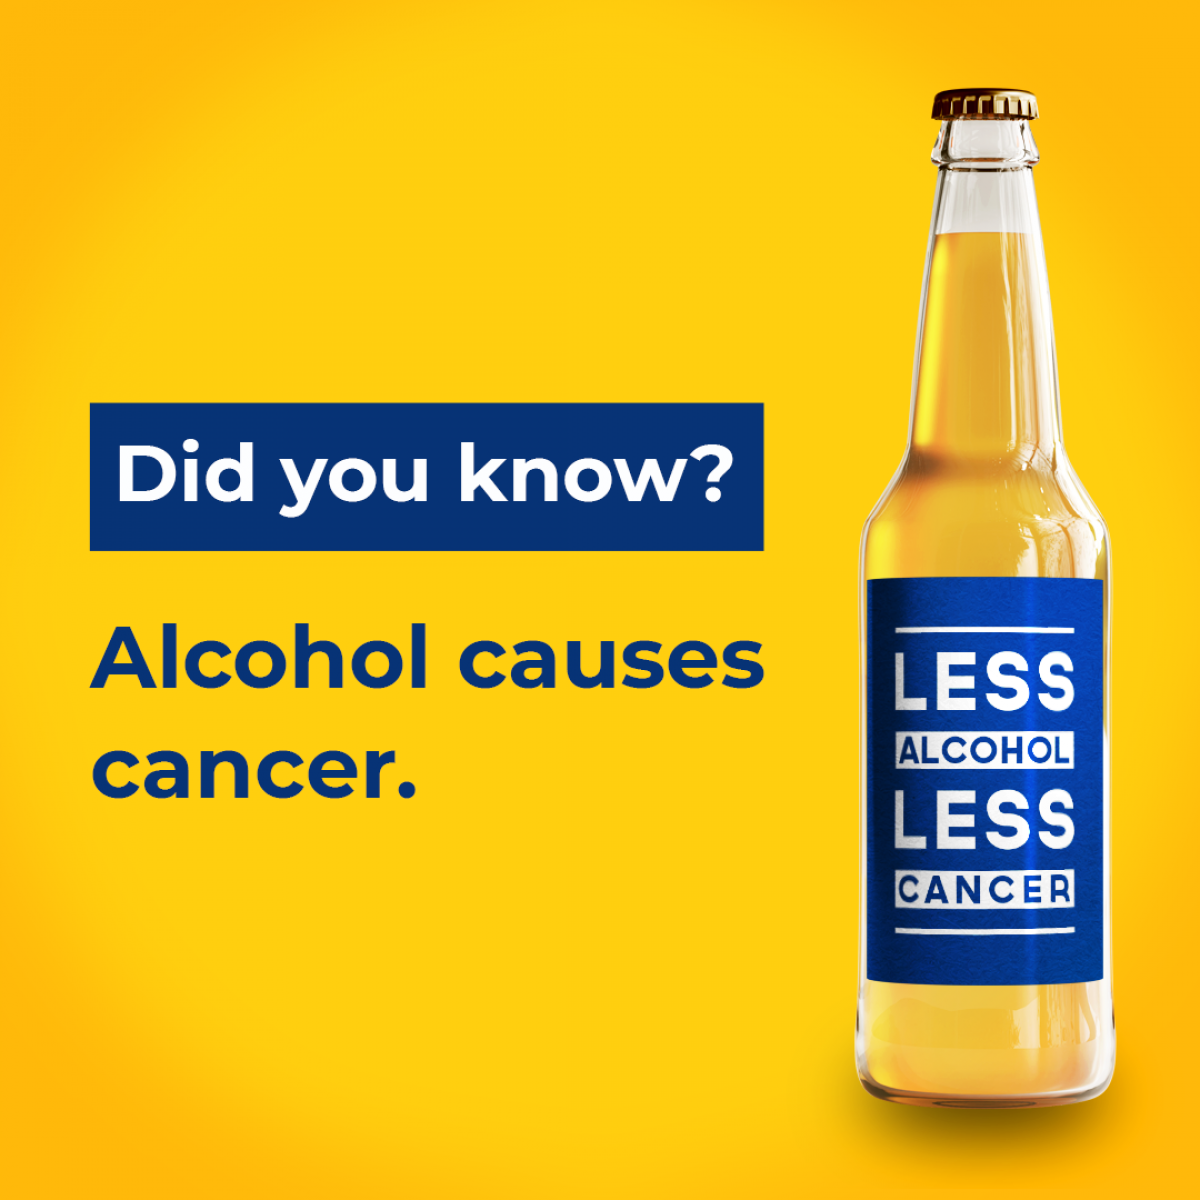 New Cancer Society campaign sheds light on link between cancer and alcohol